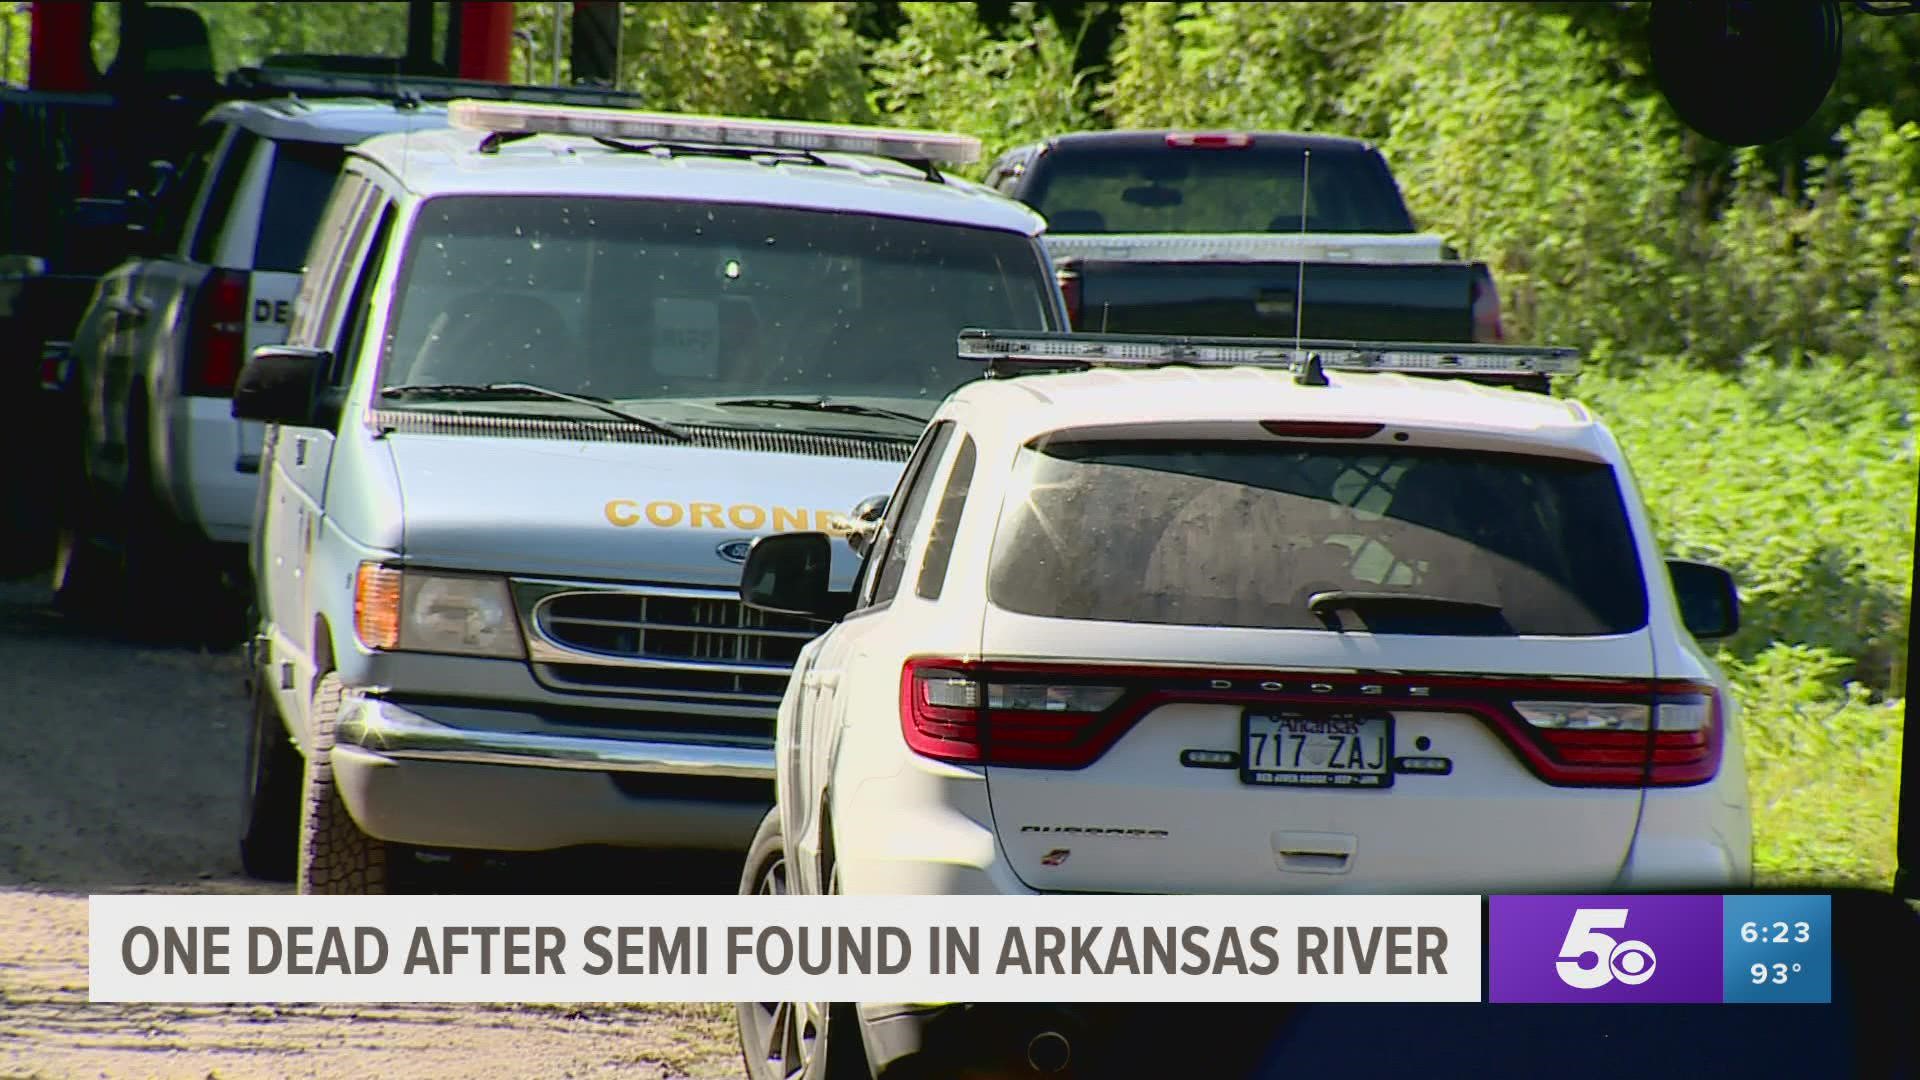 Deputies found the body of a male in a semi-truck that was submerged in the water almost the entire length of the vehicle.